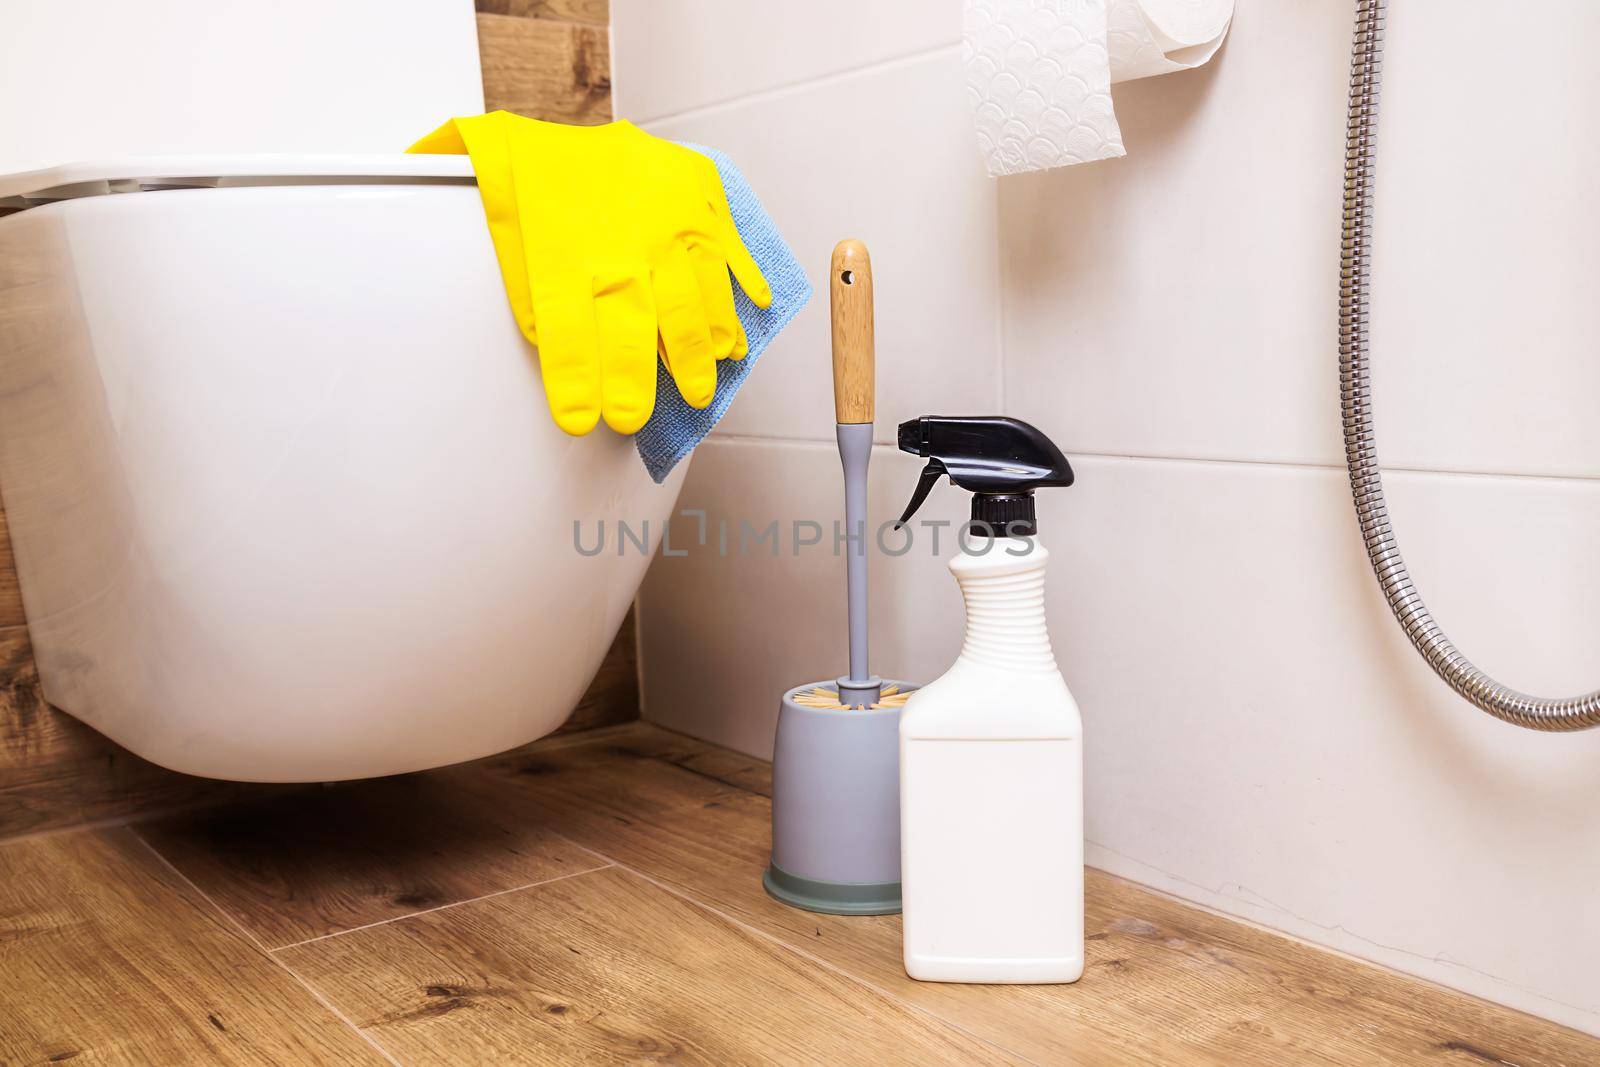 White detergent bottle mockup, bathroom cleaning. Against the background of the toilet is a jar of liquid, next to it is a rag, copy-paste. The concept of cleaning in the house, ecology, disinfection